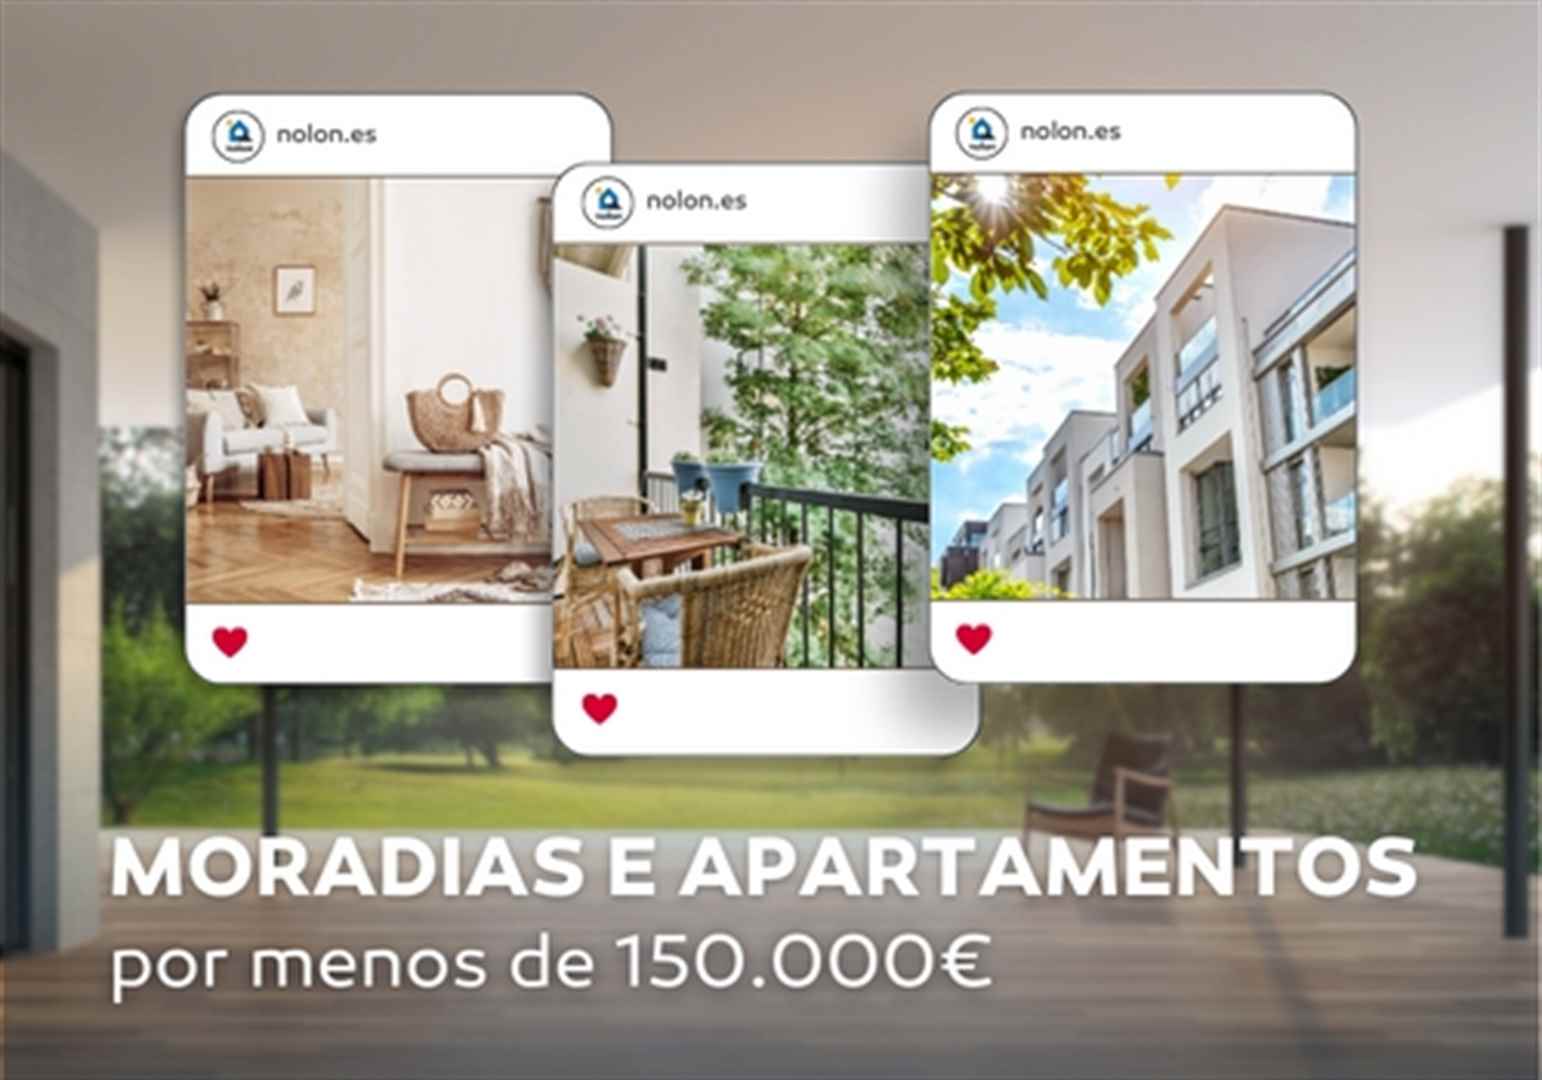 Flats and Apartments for less than 150.000€